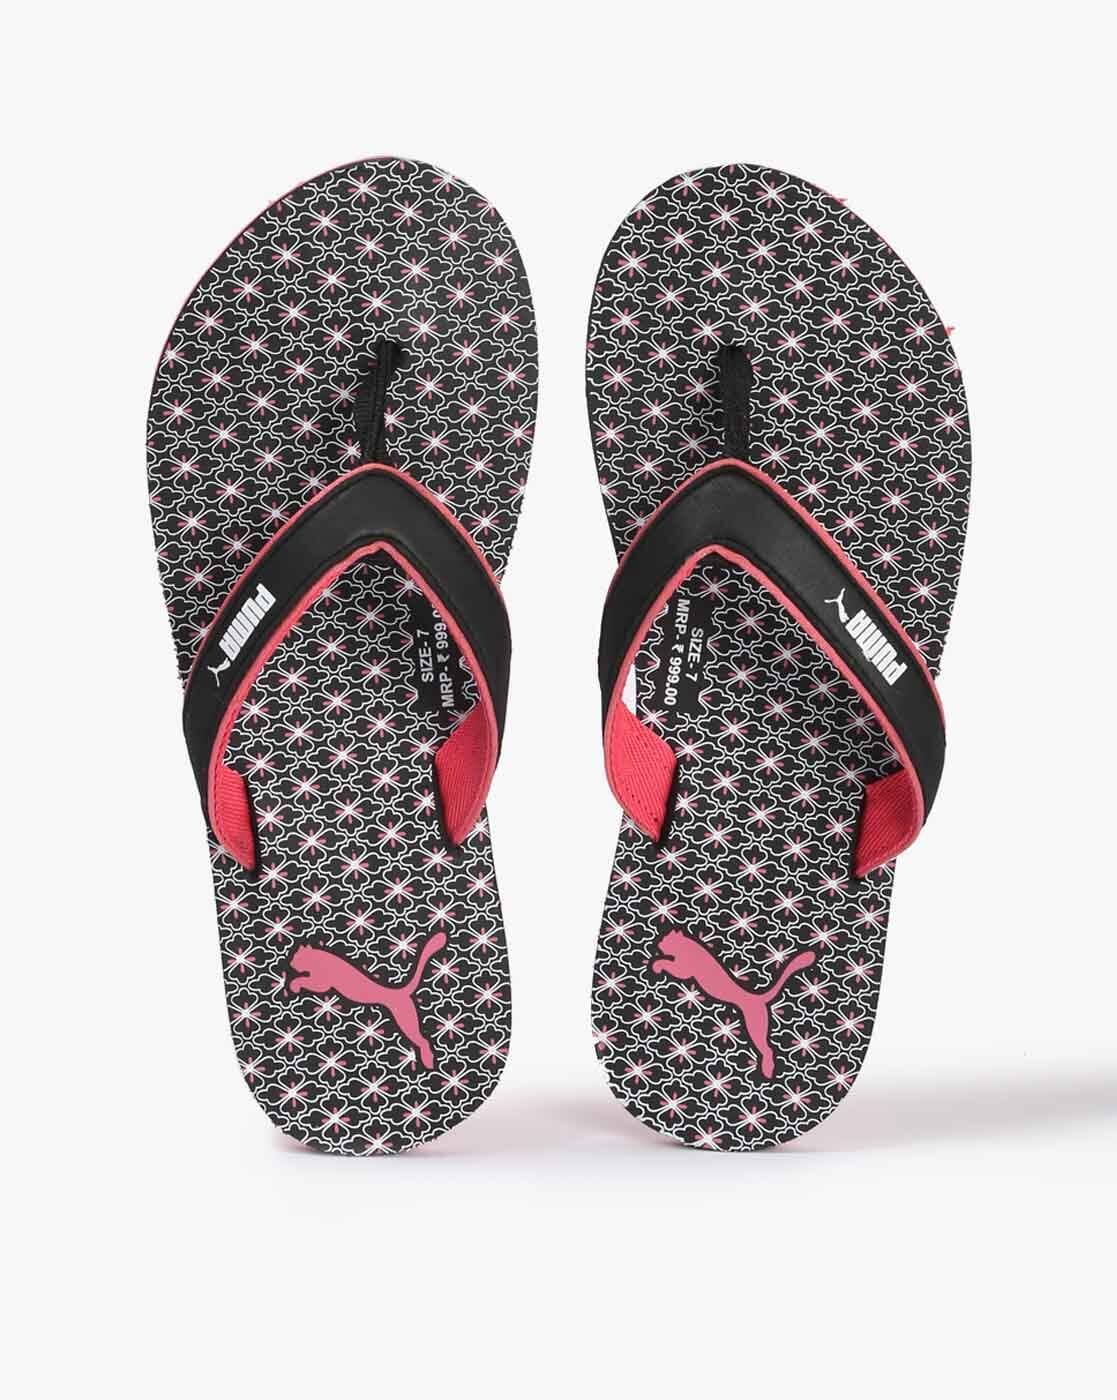 Buy slippers puma under 300 in India @ Limeroad